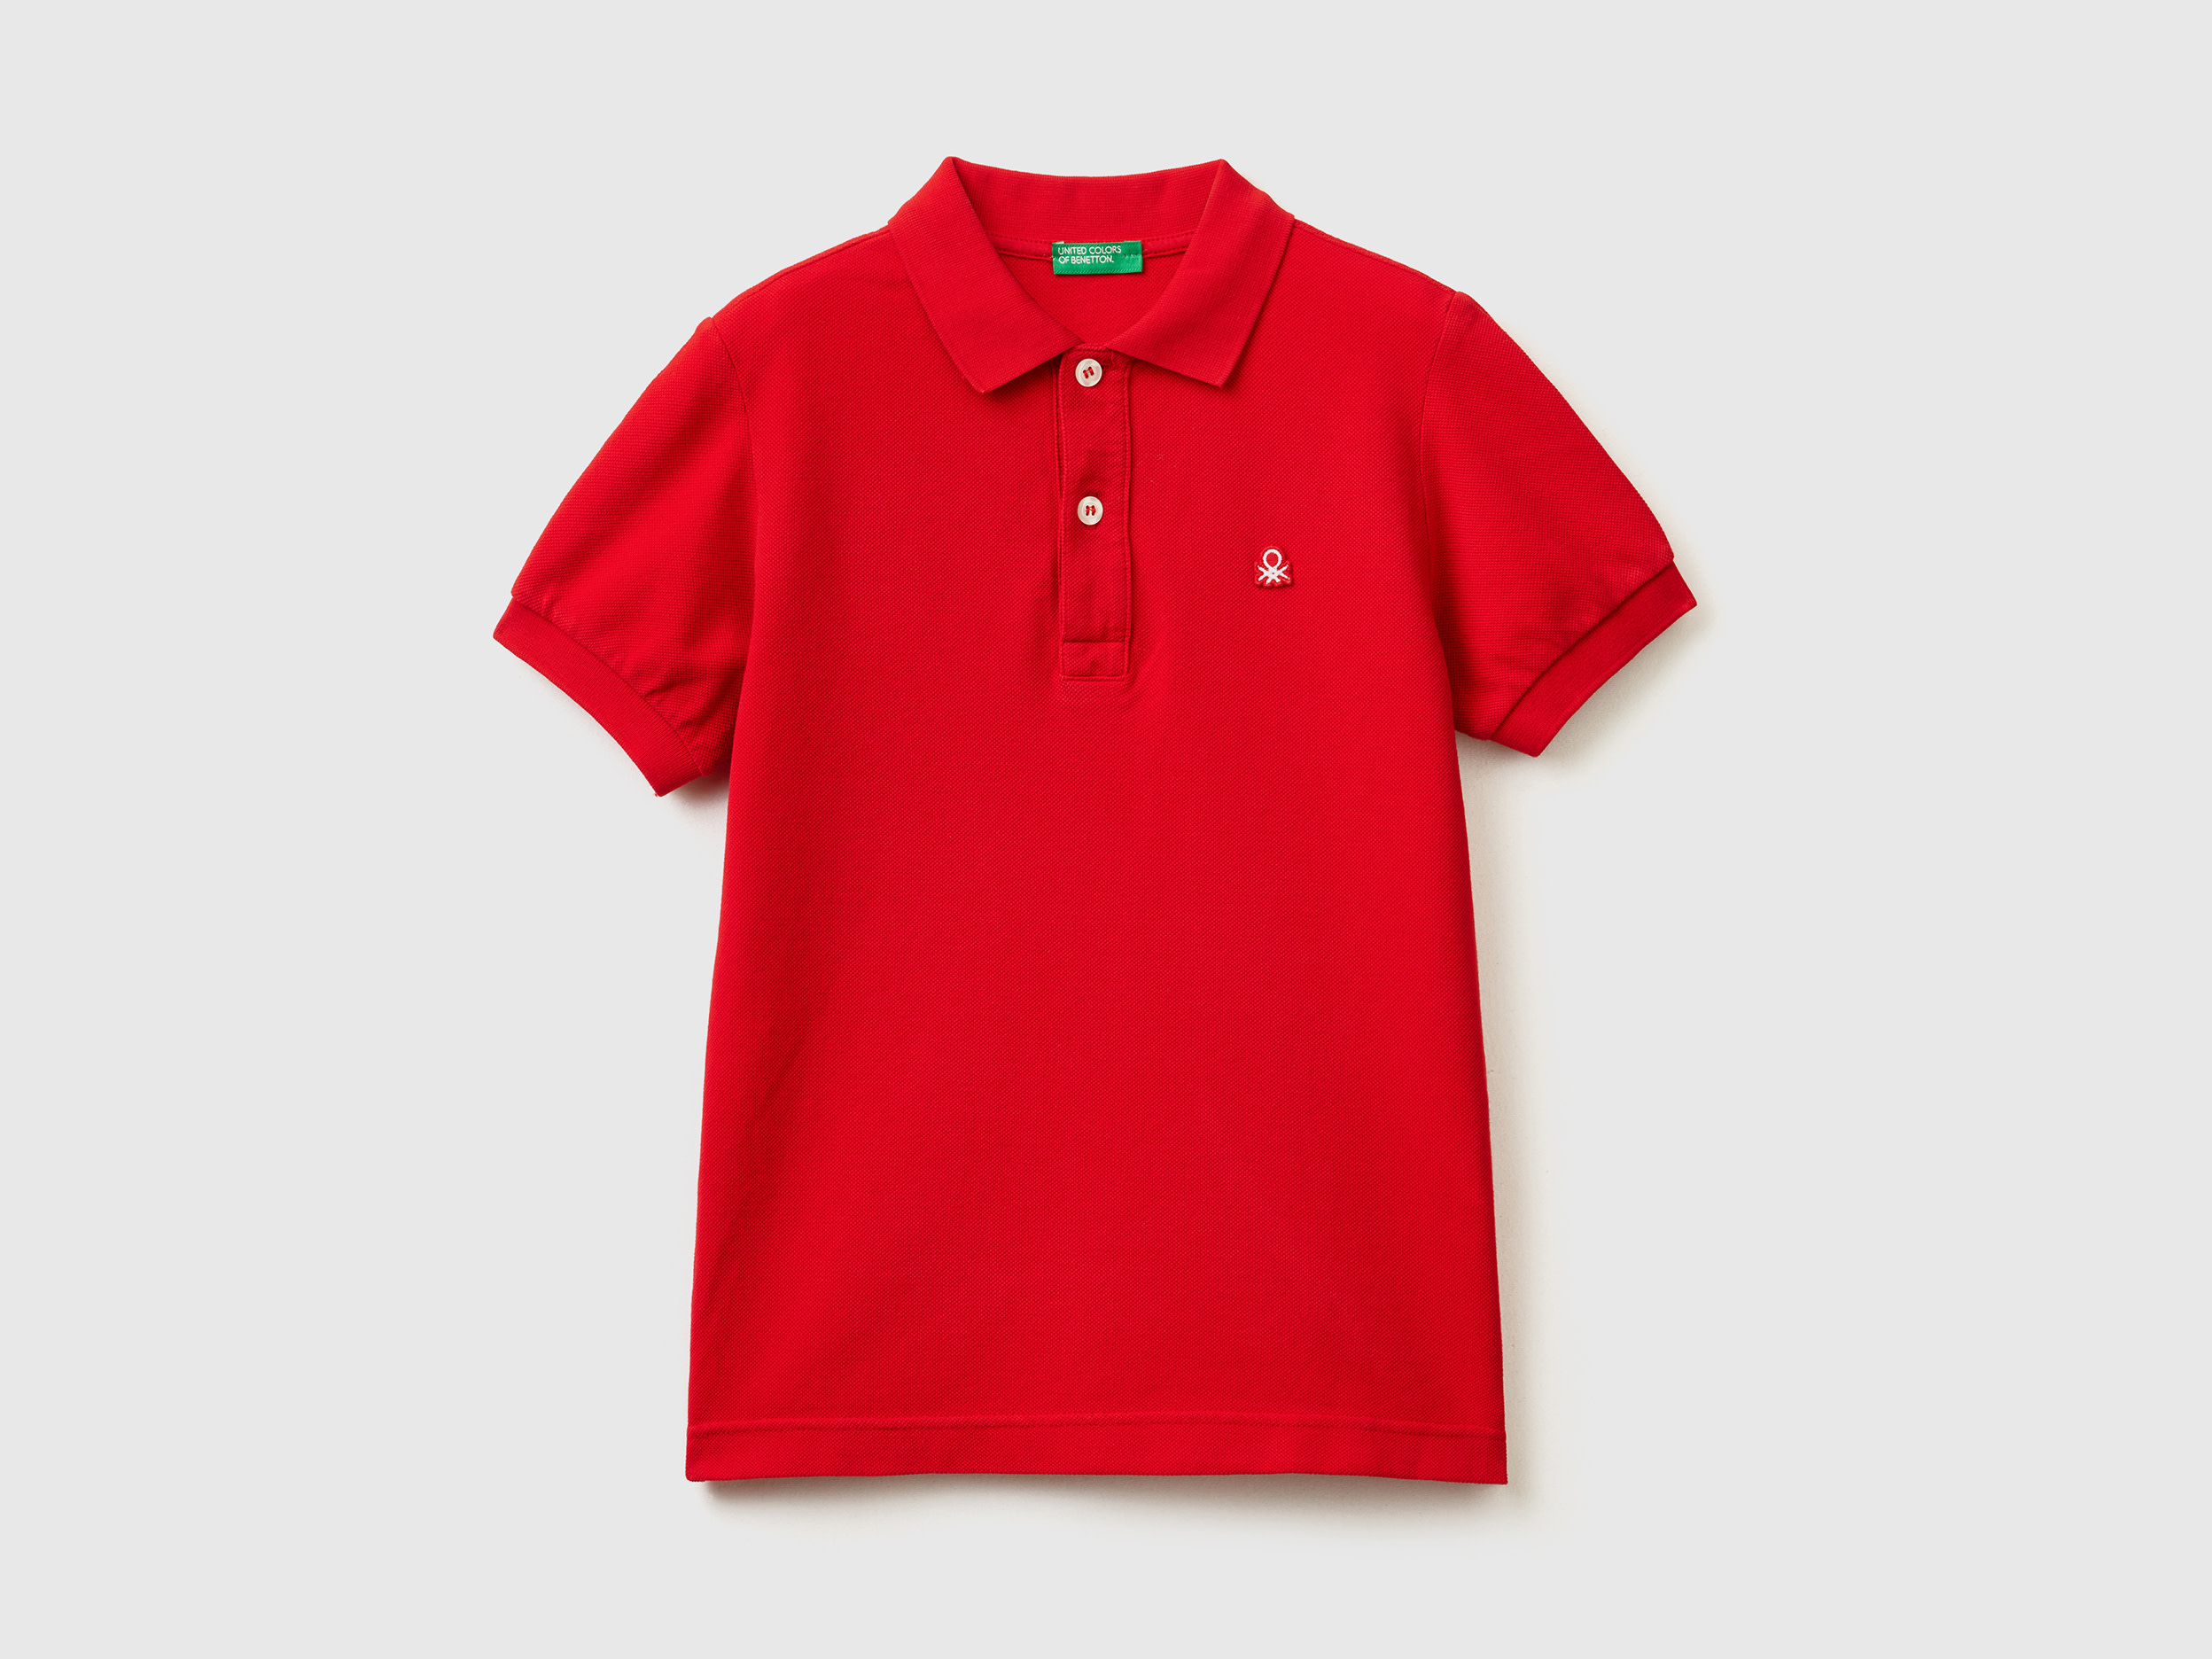 Image of Benetton, Slim Fit Polo In 100% Organic Cotton, size XL, Red, Kids